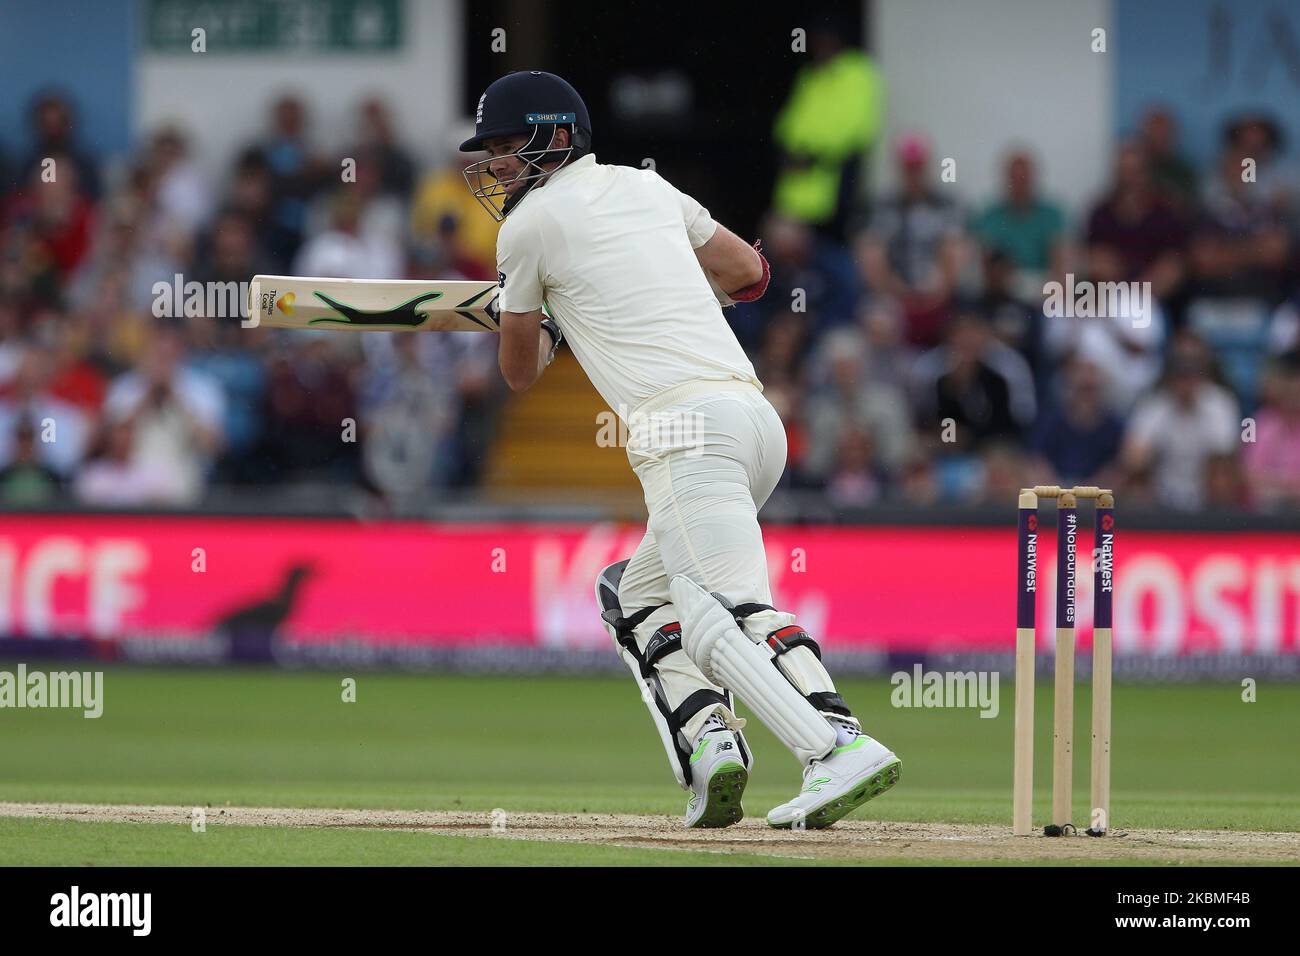 James Anderson of England batting during the third day of the Second Nat West Test match between England and Pakistan at Headingley Cricket Ground, Leeds on Sunday 3rd June 2018. (Photo by Mark Fletcher/MI News/NurPhoto) Stock Photo